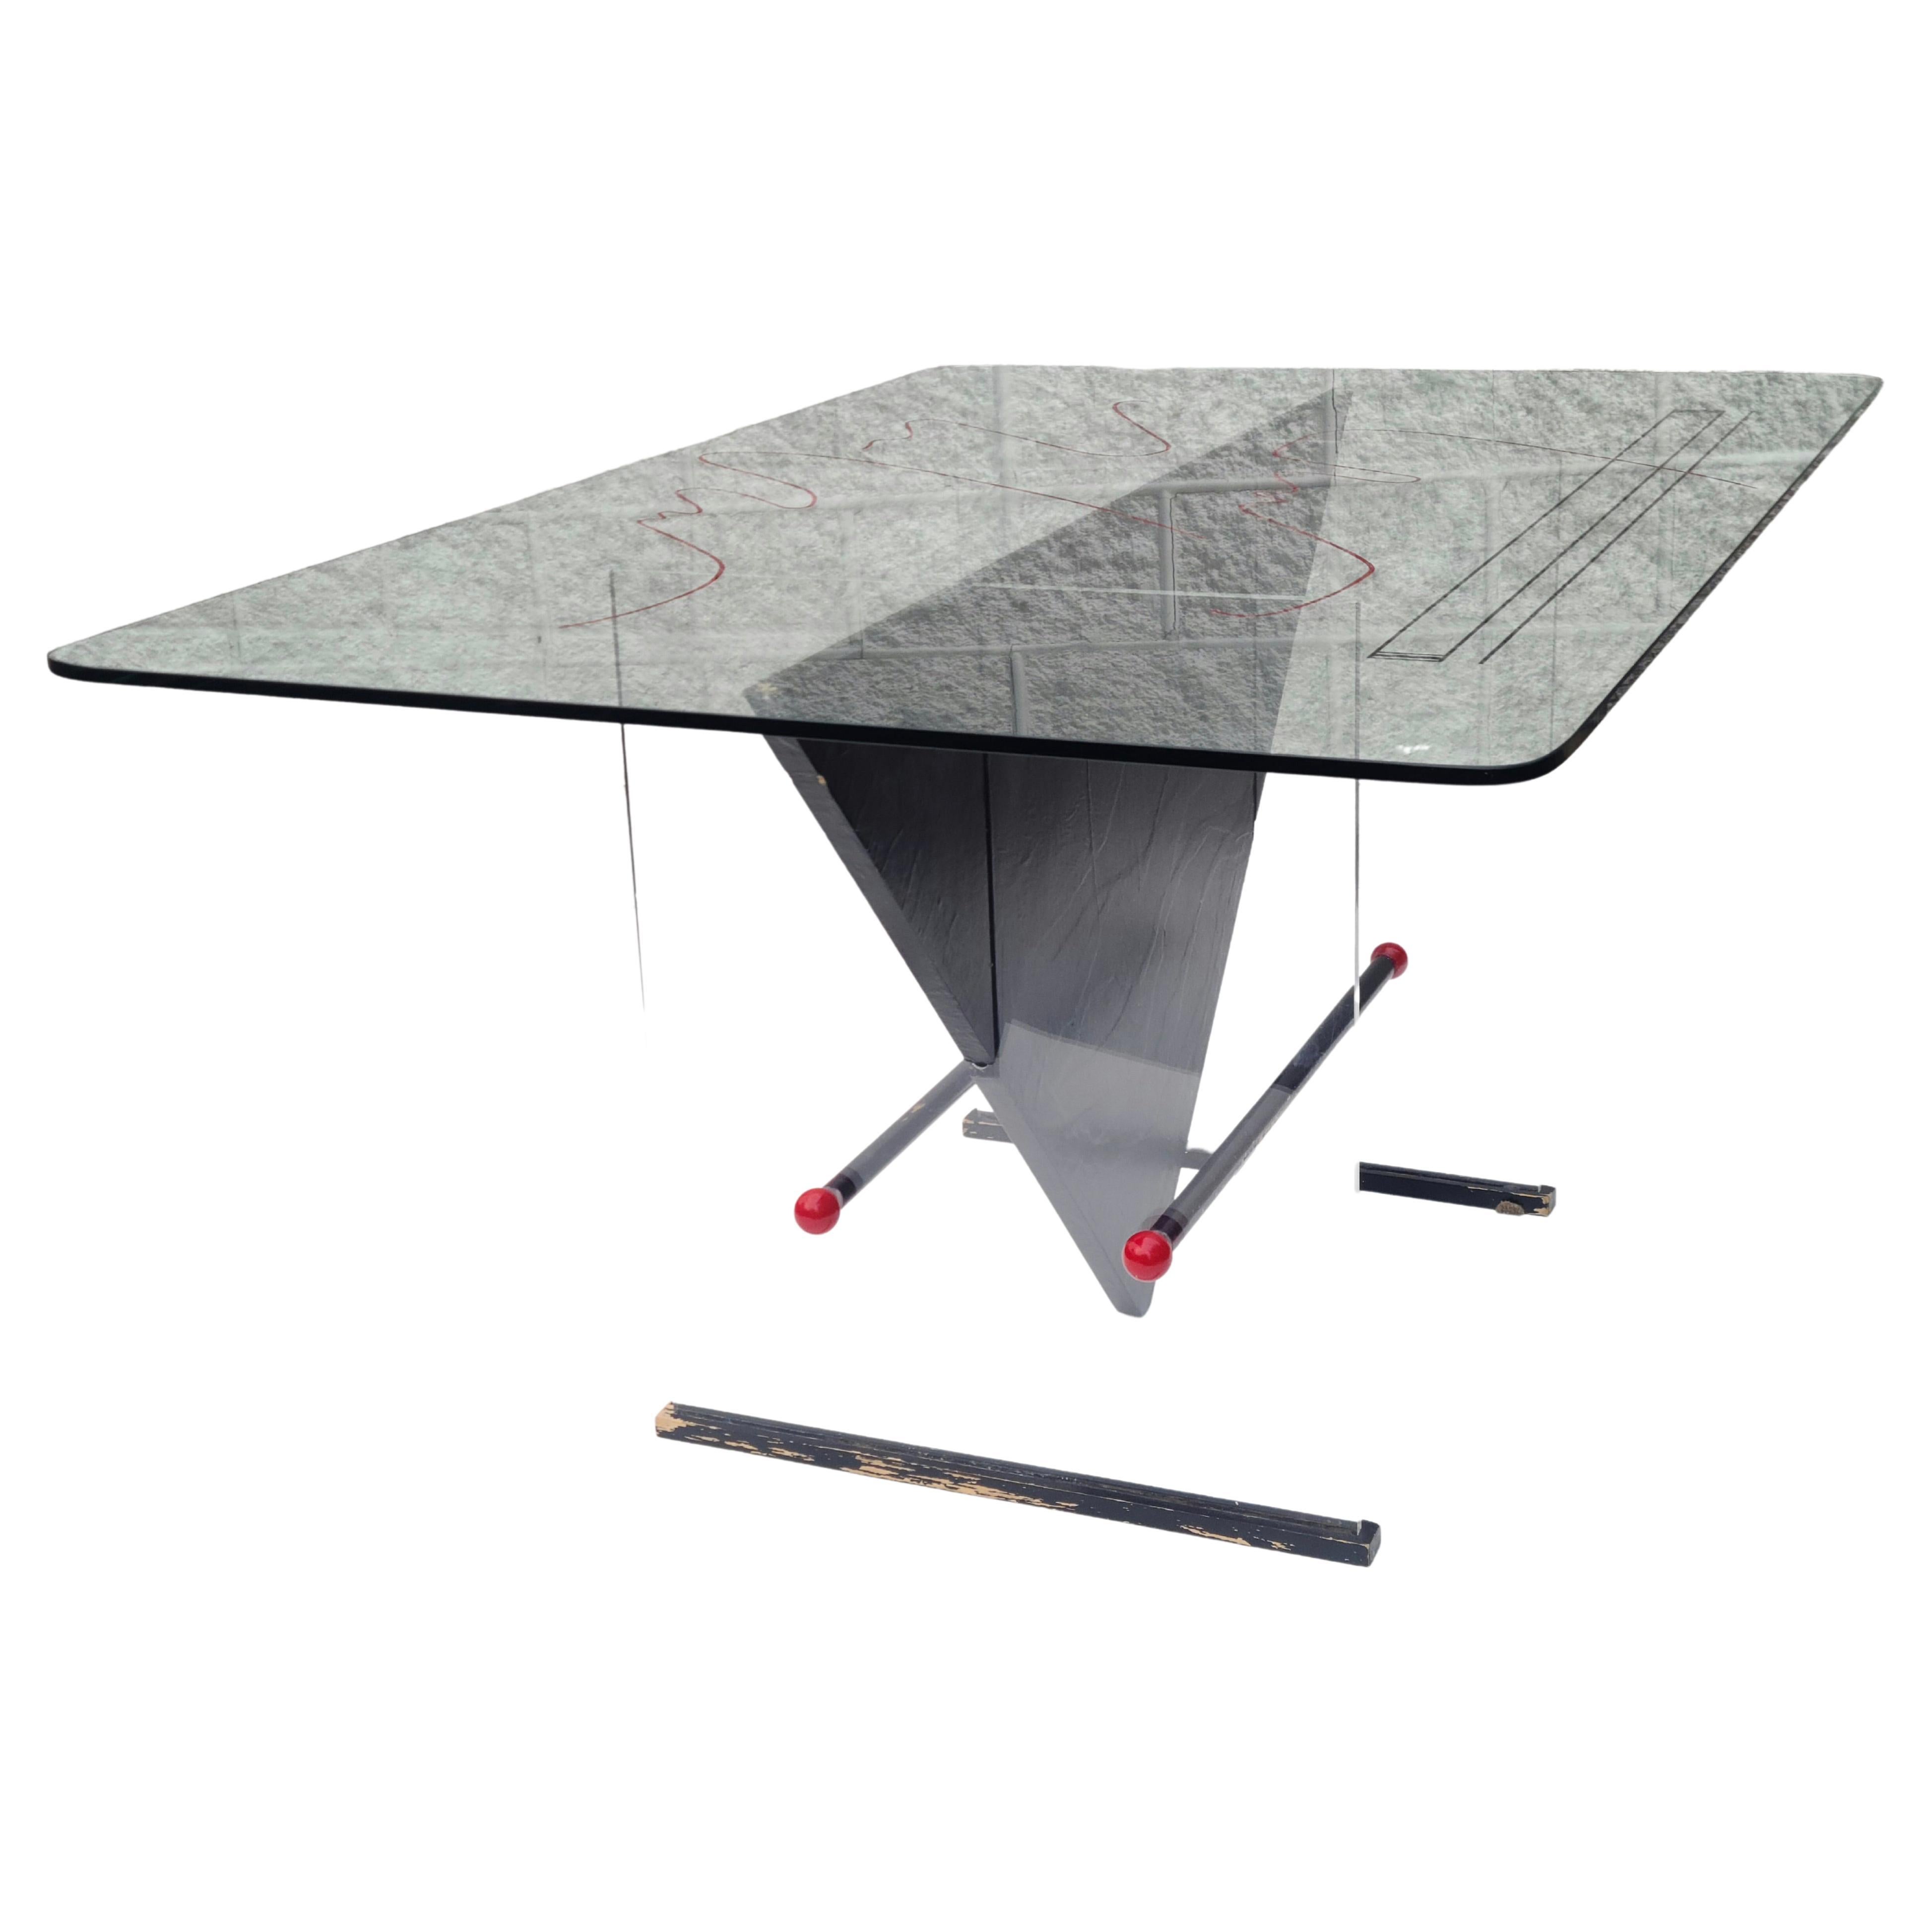 Please feel free to reach our for accurate shipping to your location.

Dining Table with Glass top on Acrylic base. Glass is etched on back side and painted in what appears to be designer's signature. Two transparent Acrylic blades on black